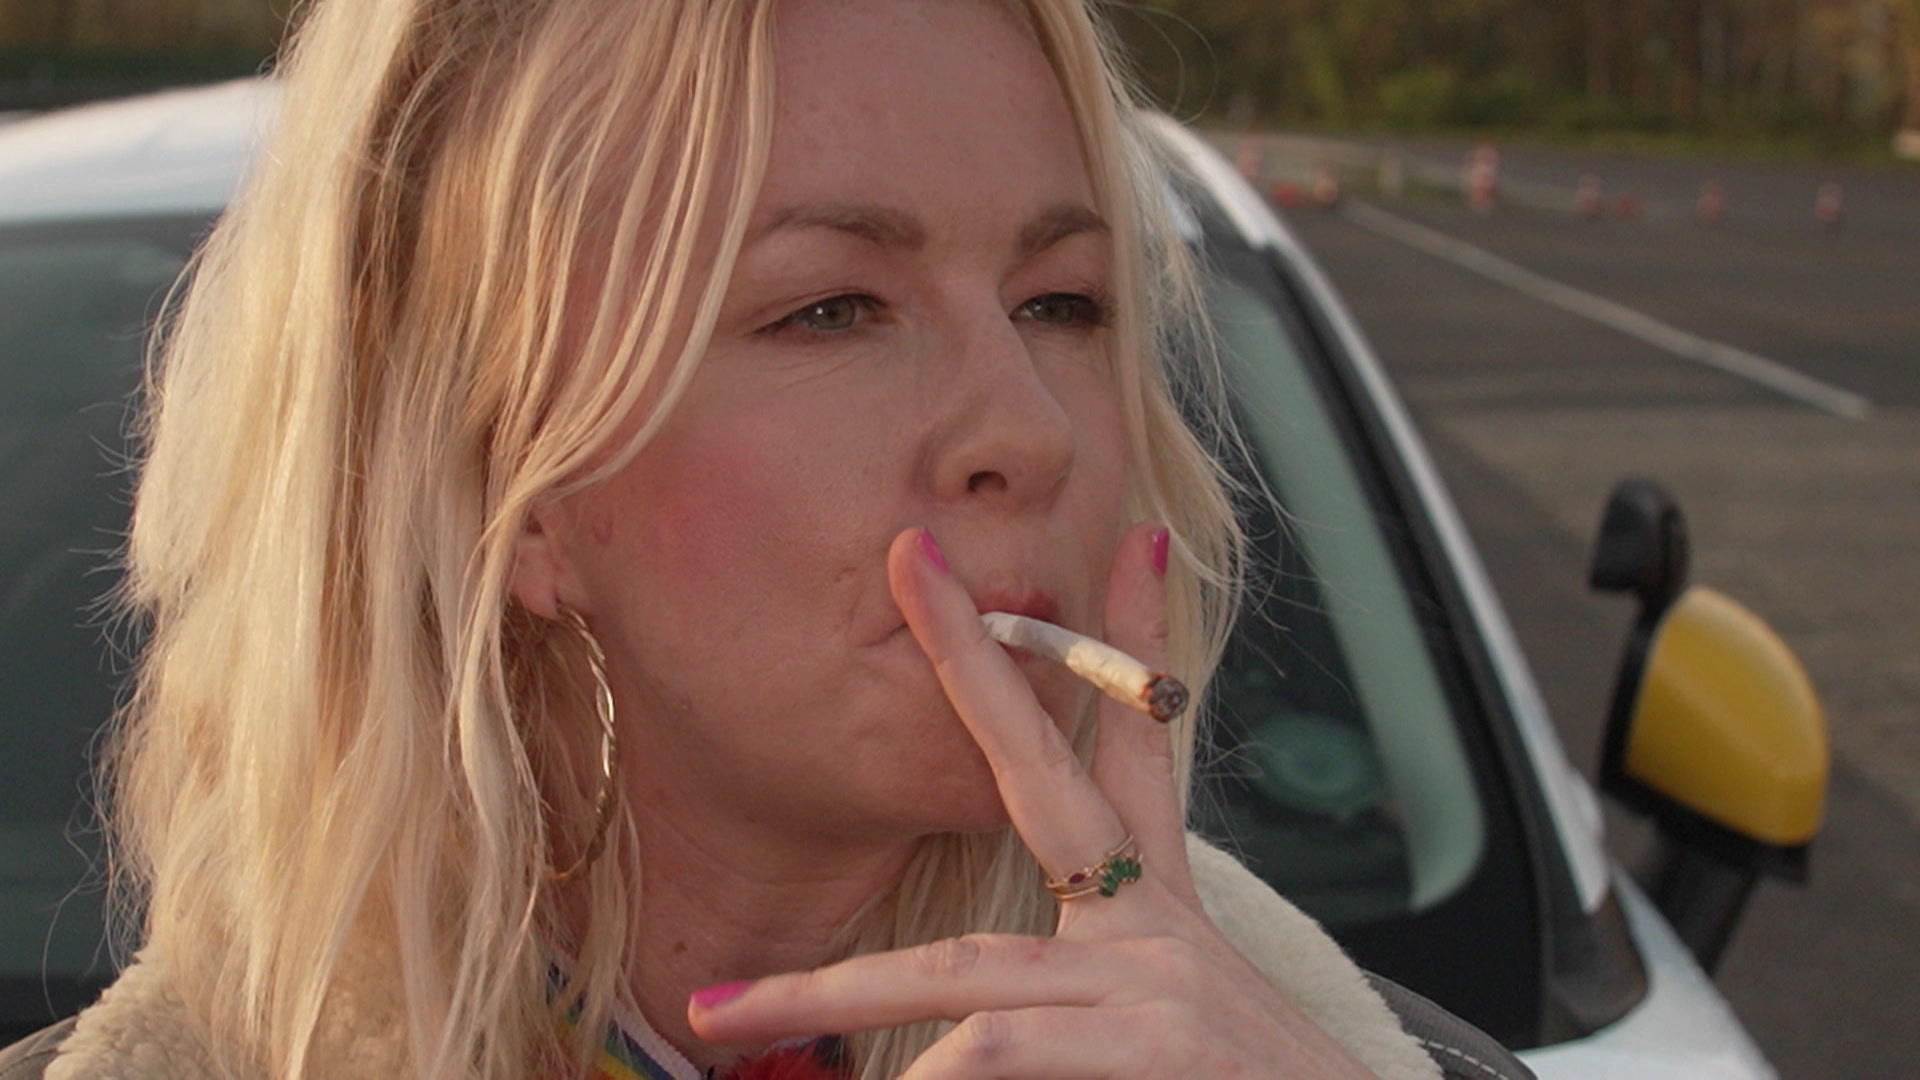 RTL reporter dares to do a cannabis self-test, first smokes cannabis, then drives a car?